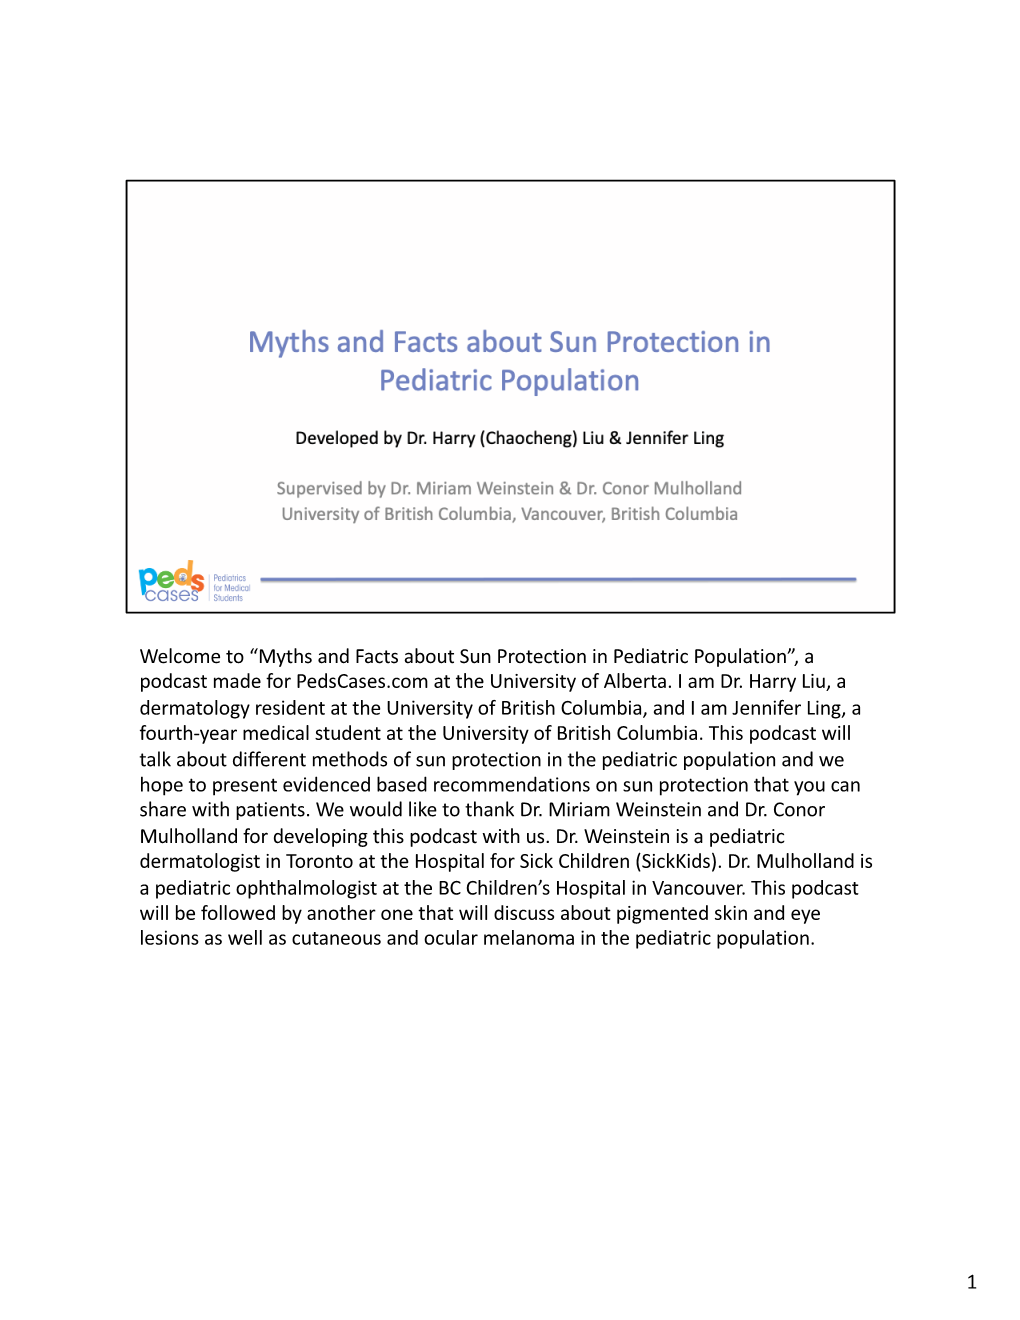 Part 1. Myths and Facts About Sun Protection in Pediatric Population